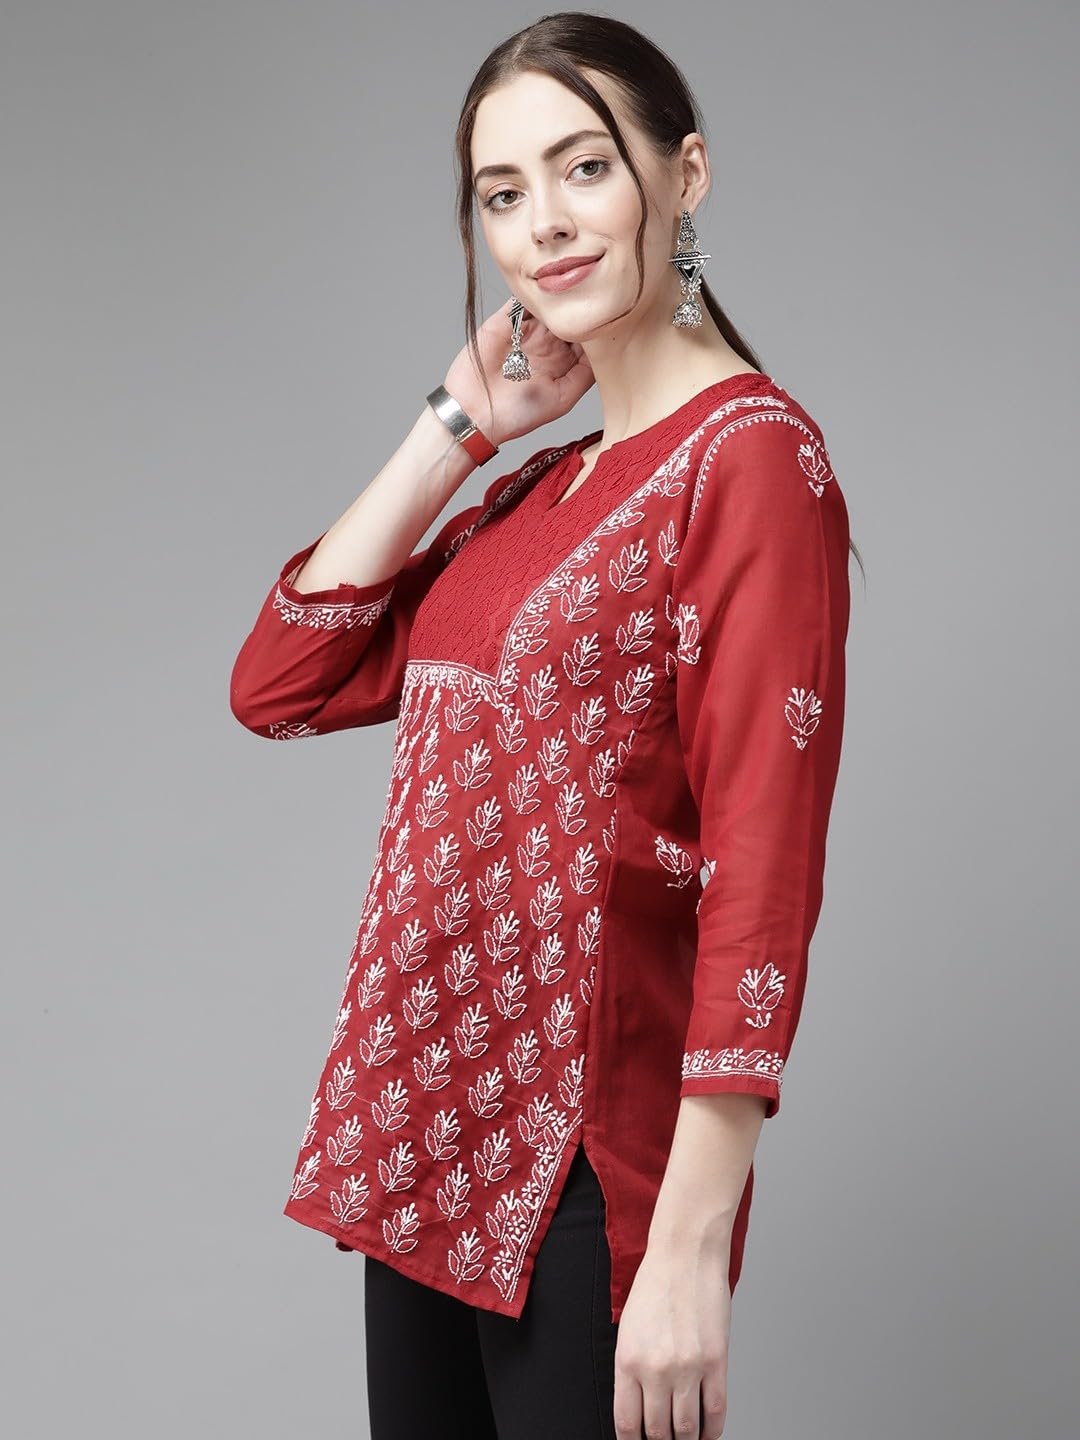 Ada Hand Embroidered Cotton Straight Top Tunic Lucknowi Chikankari Short Kurti for Women A911213 Red (S)